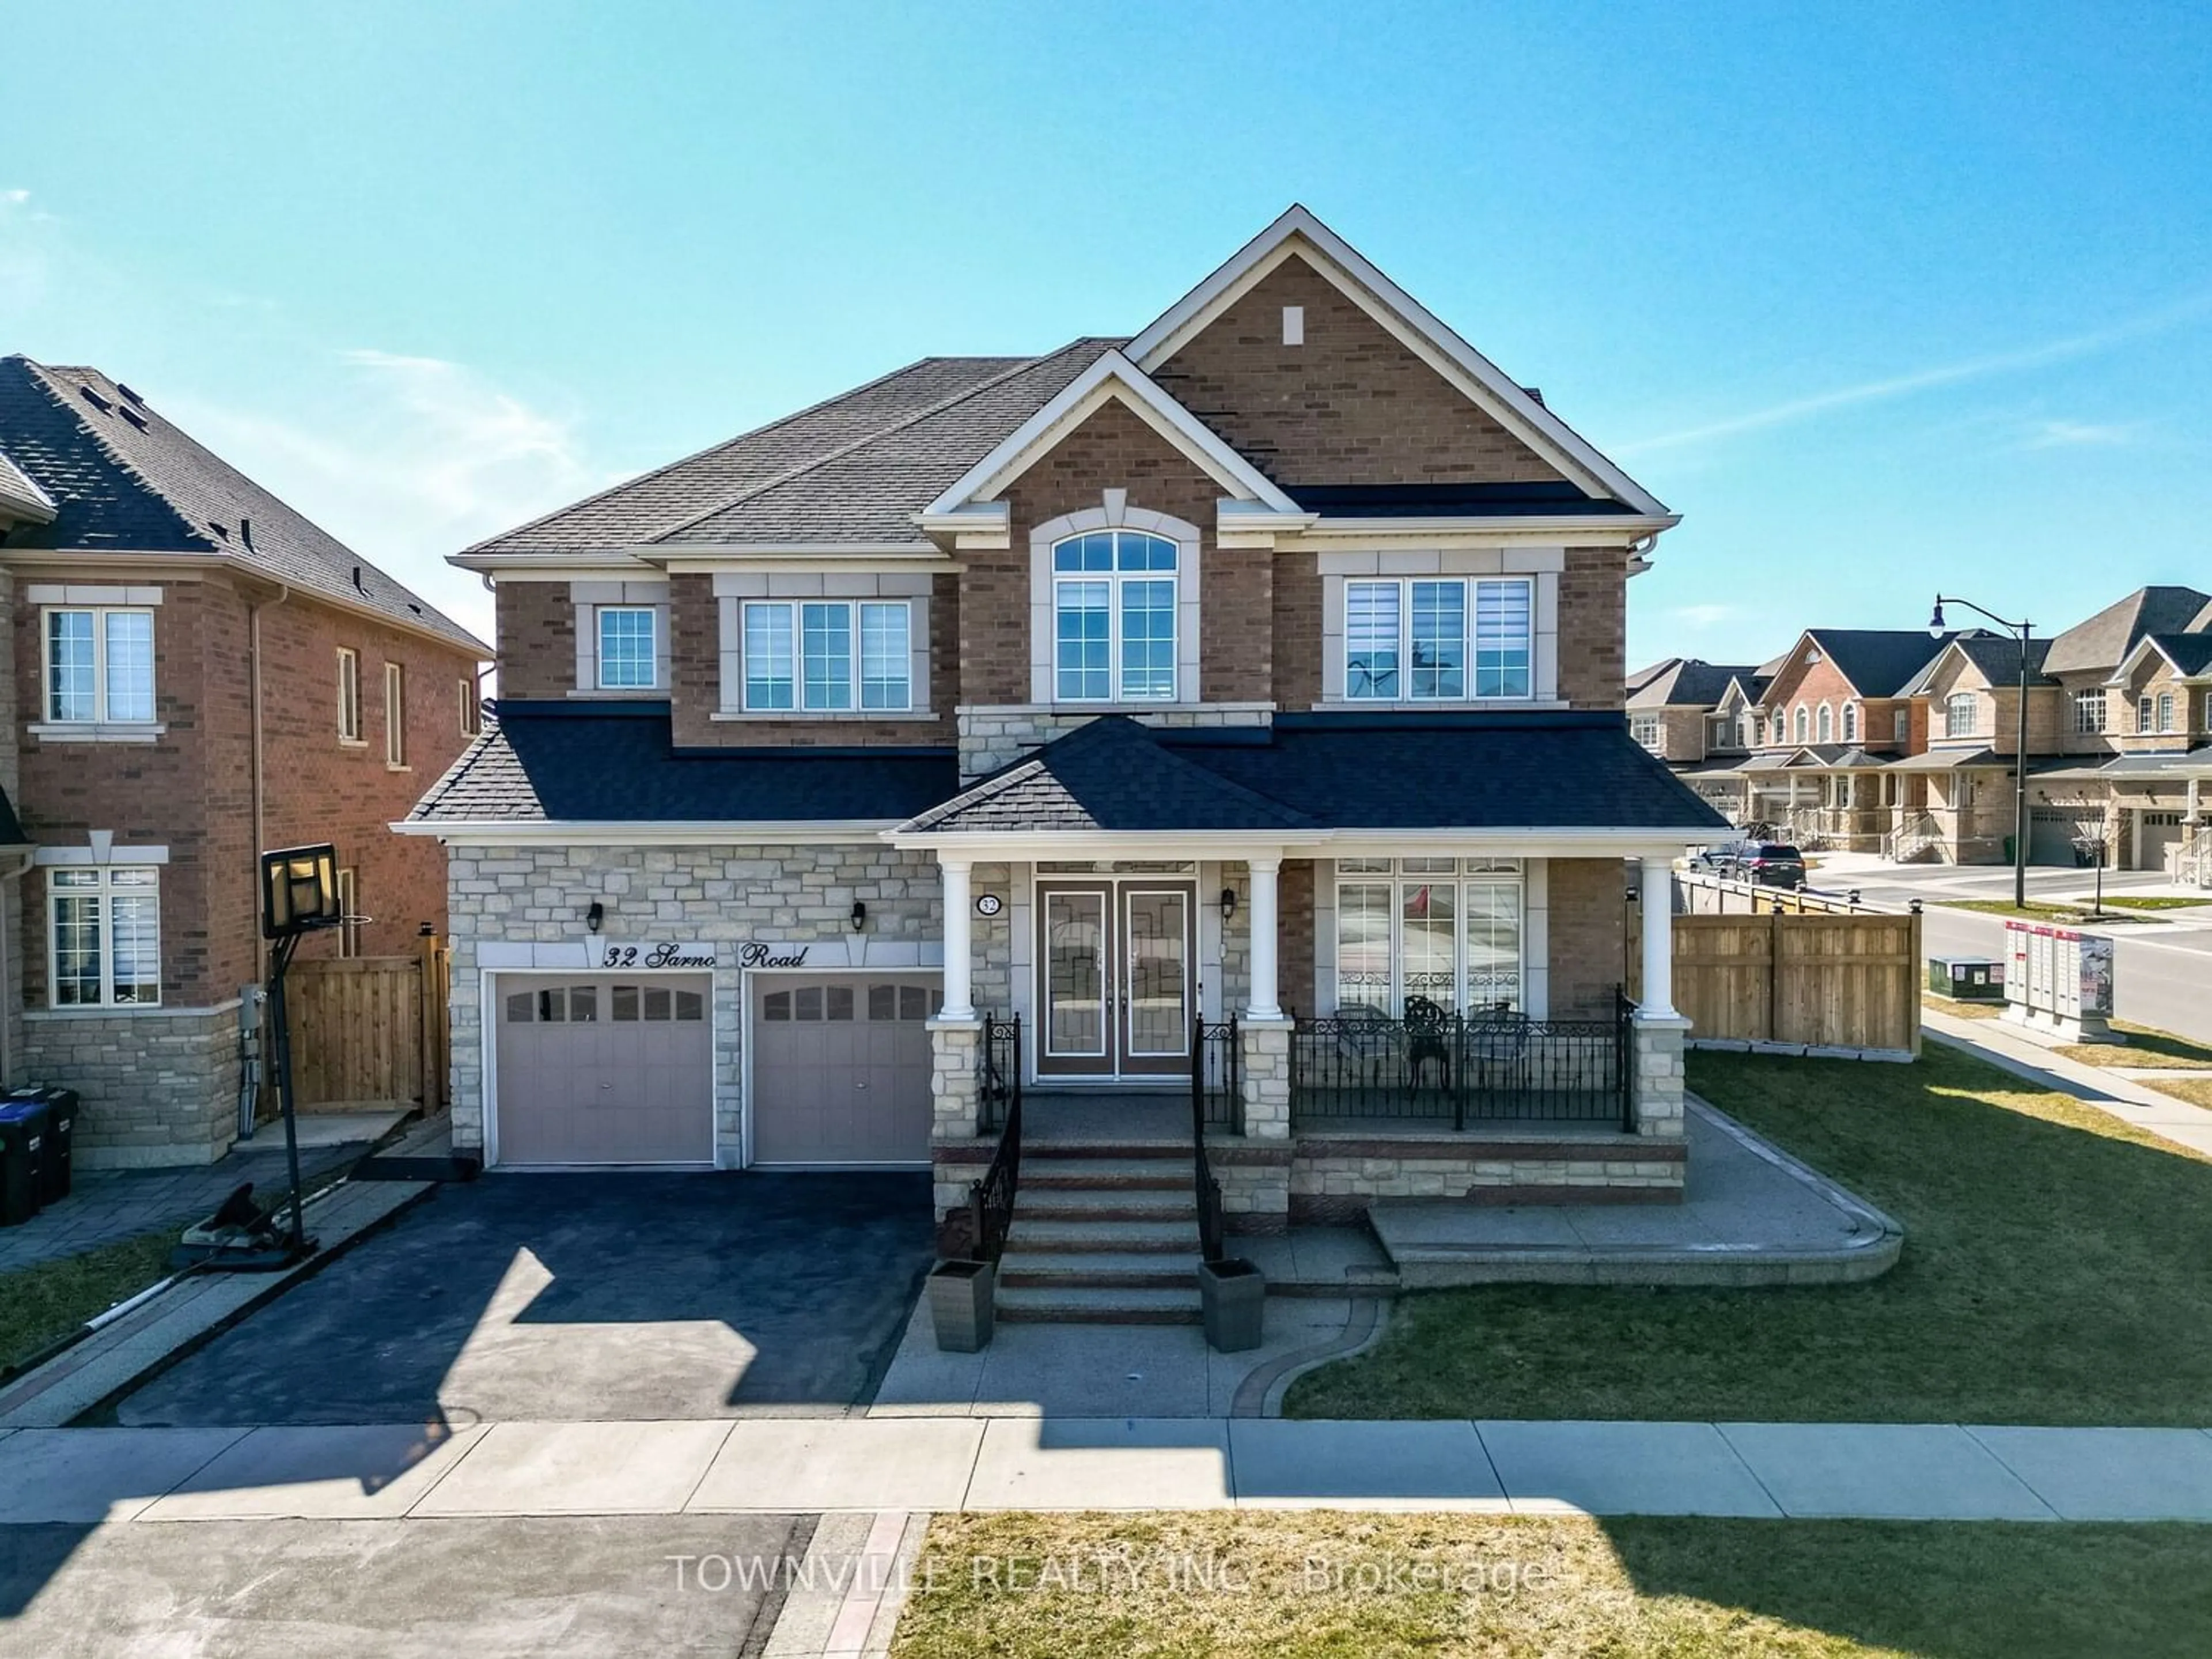 Home with brick exterior material for 32 Sarno Rd, Brampton Ontario L6R 4A3